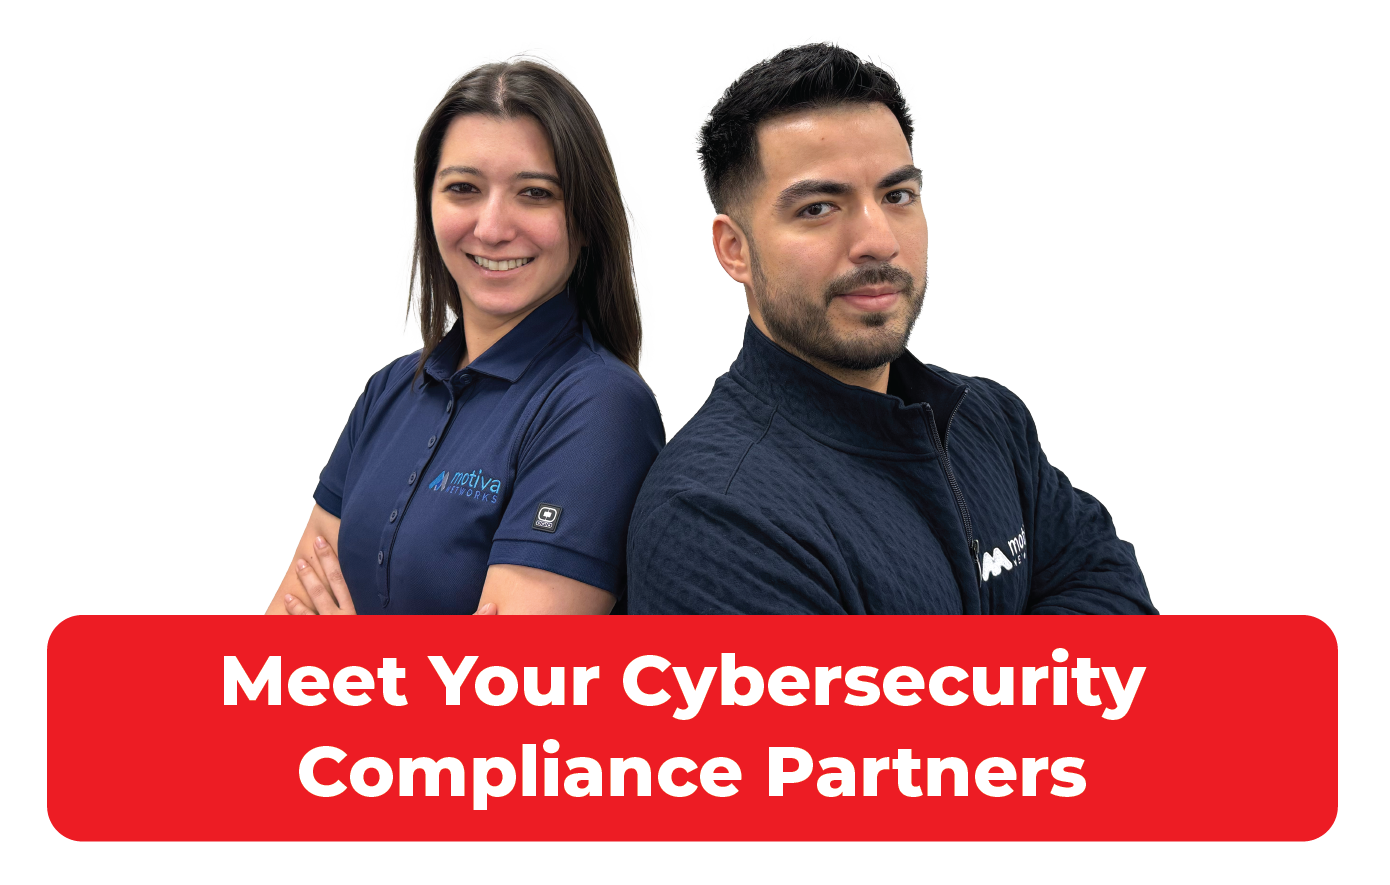 Meet Your Cybersecurity Compliance Partners